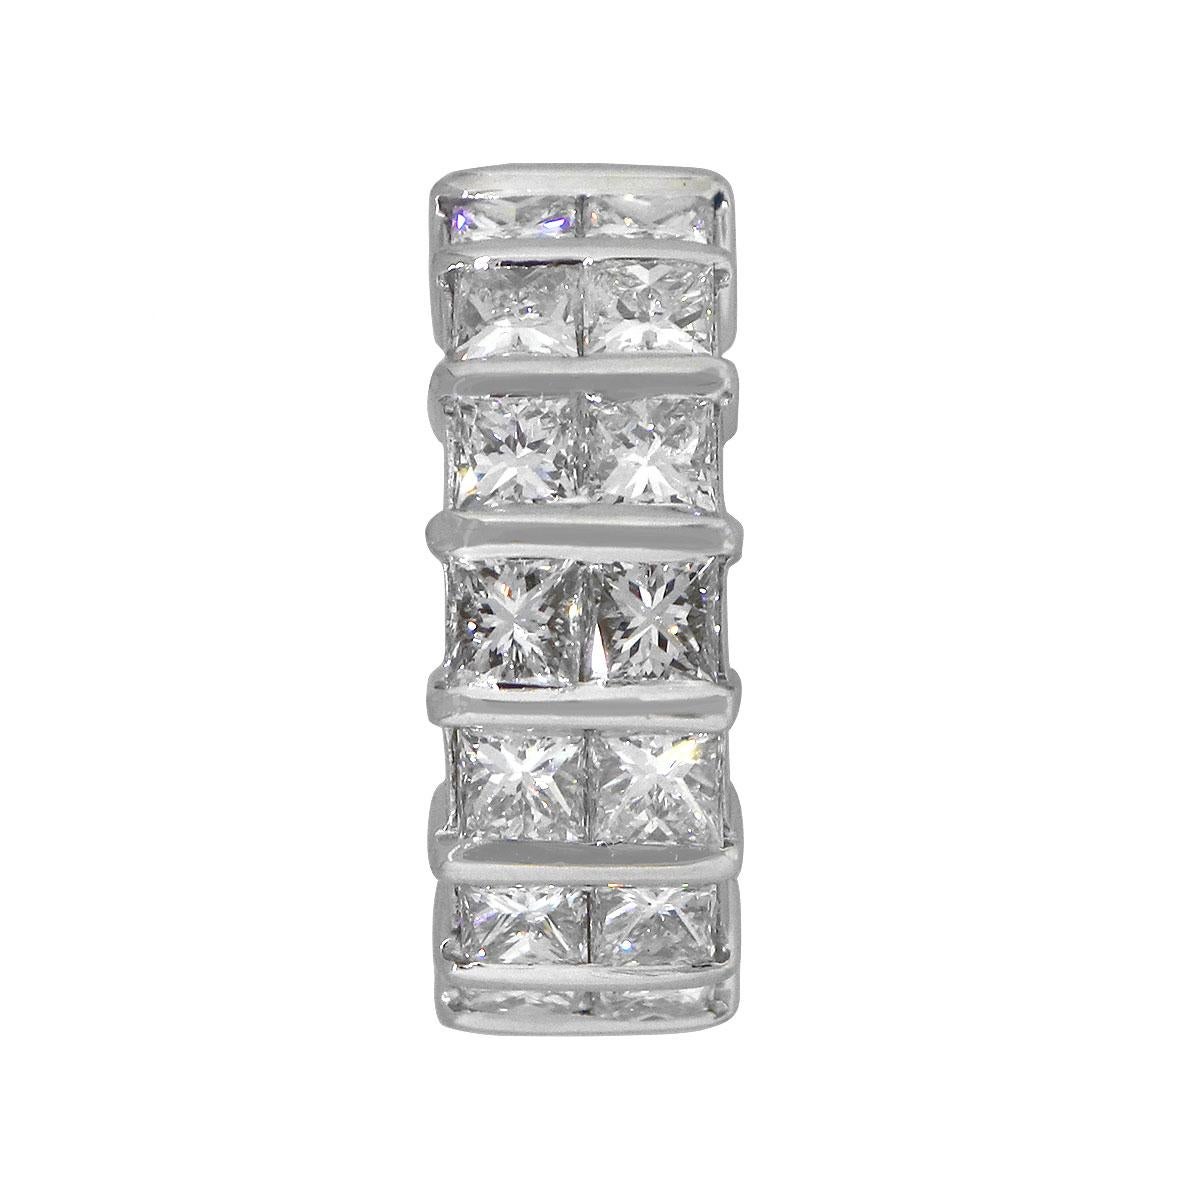 Material: Platinum
Diamond Details: Approx. 9.60ctw of Princess cut diamonds. Diamonds are J in color and VS in clarity
Ring Size: 6.5
Ring Measurements: 0.95″ x 0.34″ x 0.95″
Total Weight: 16g (10.3dwt)
SKU: A30312638